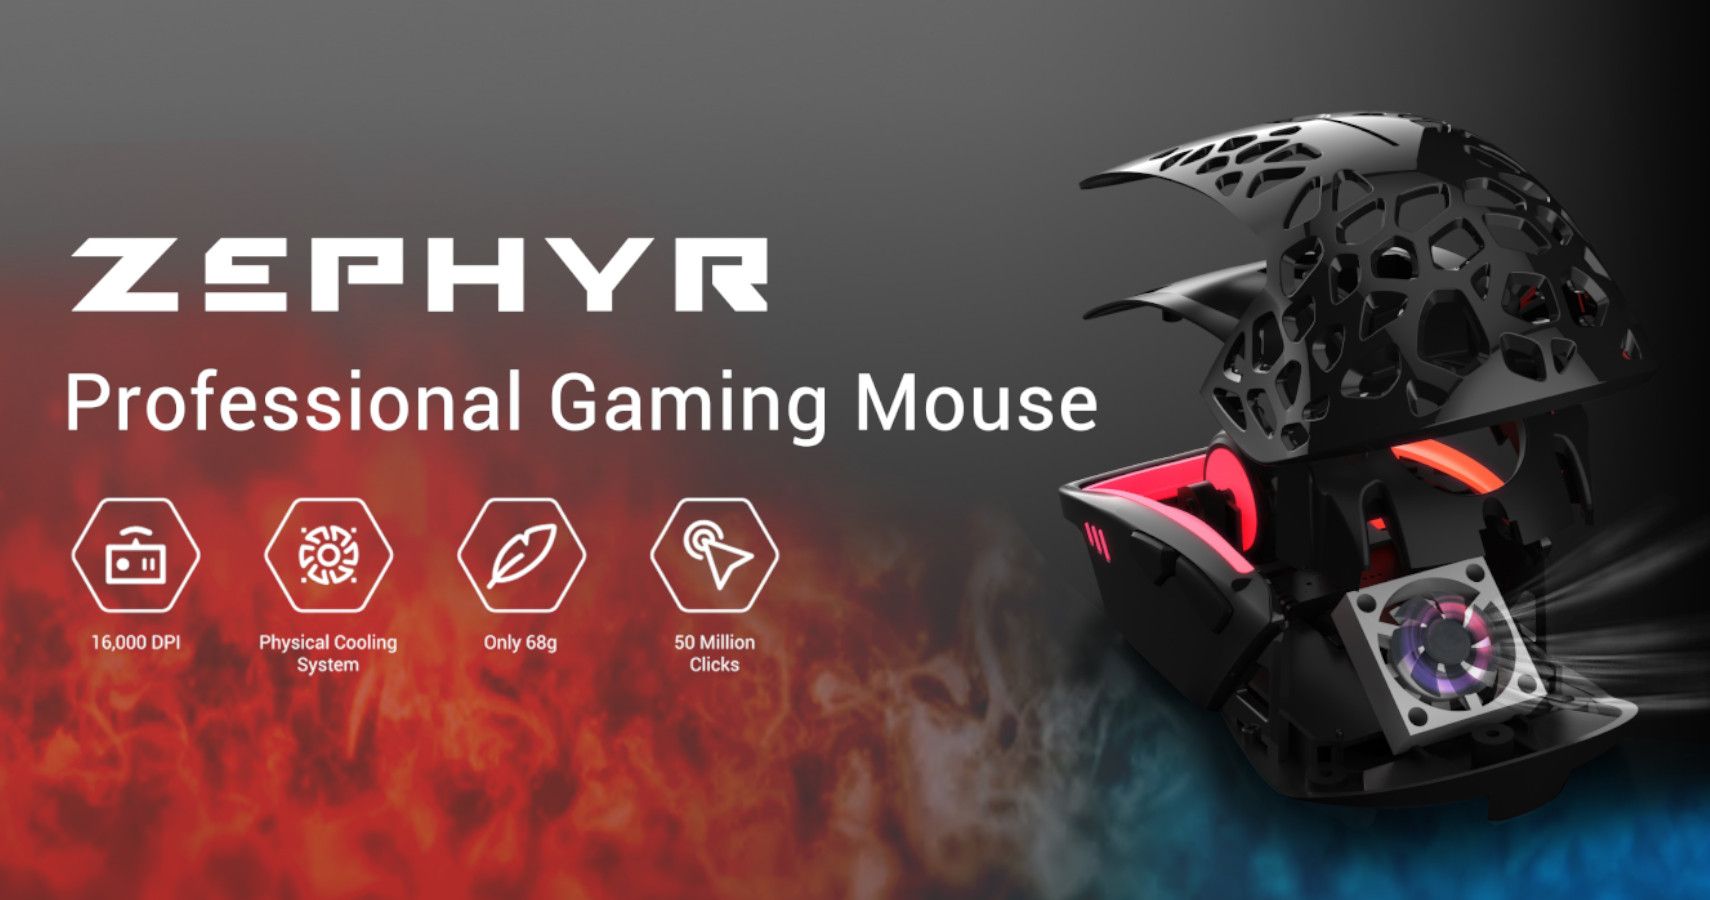 zephyr gaming mouse amazon